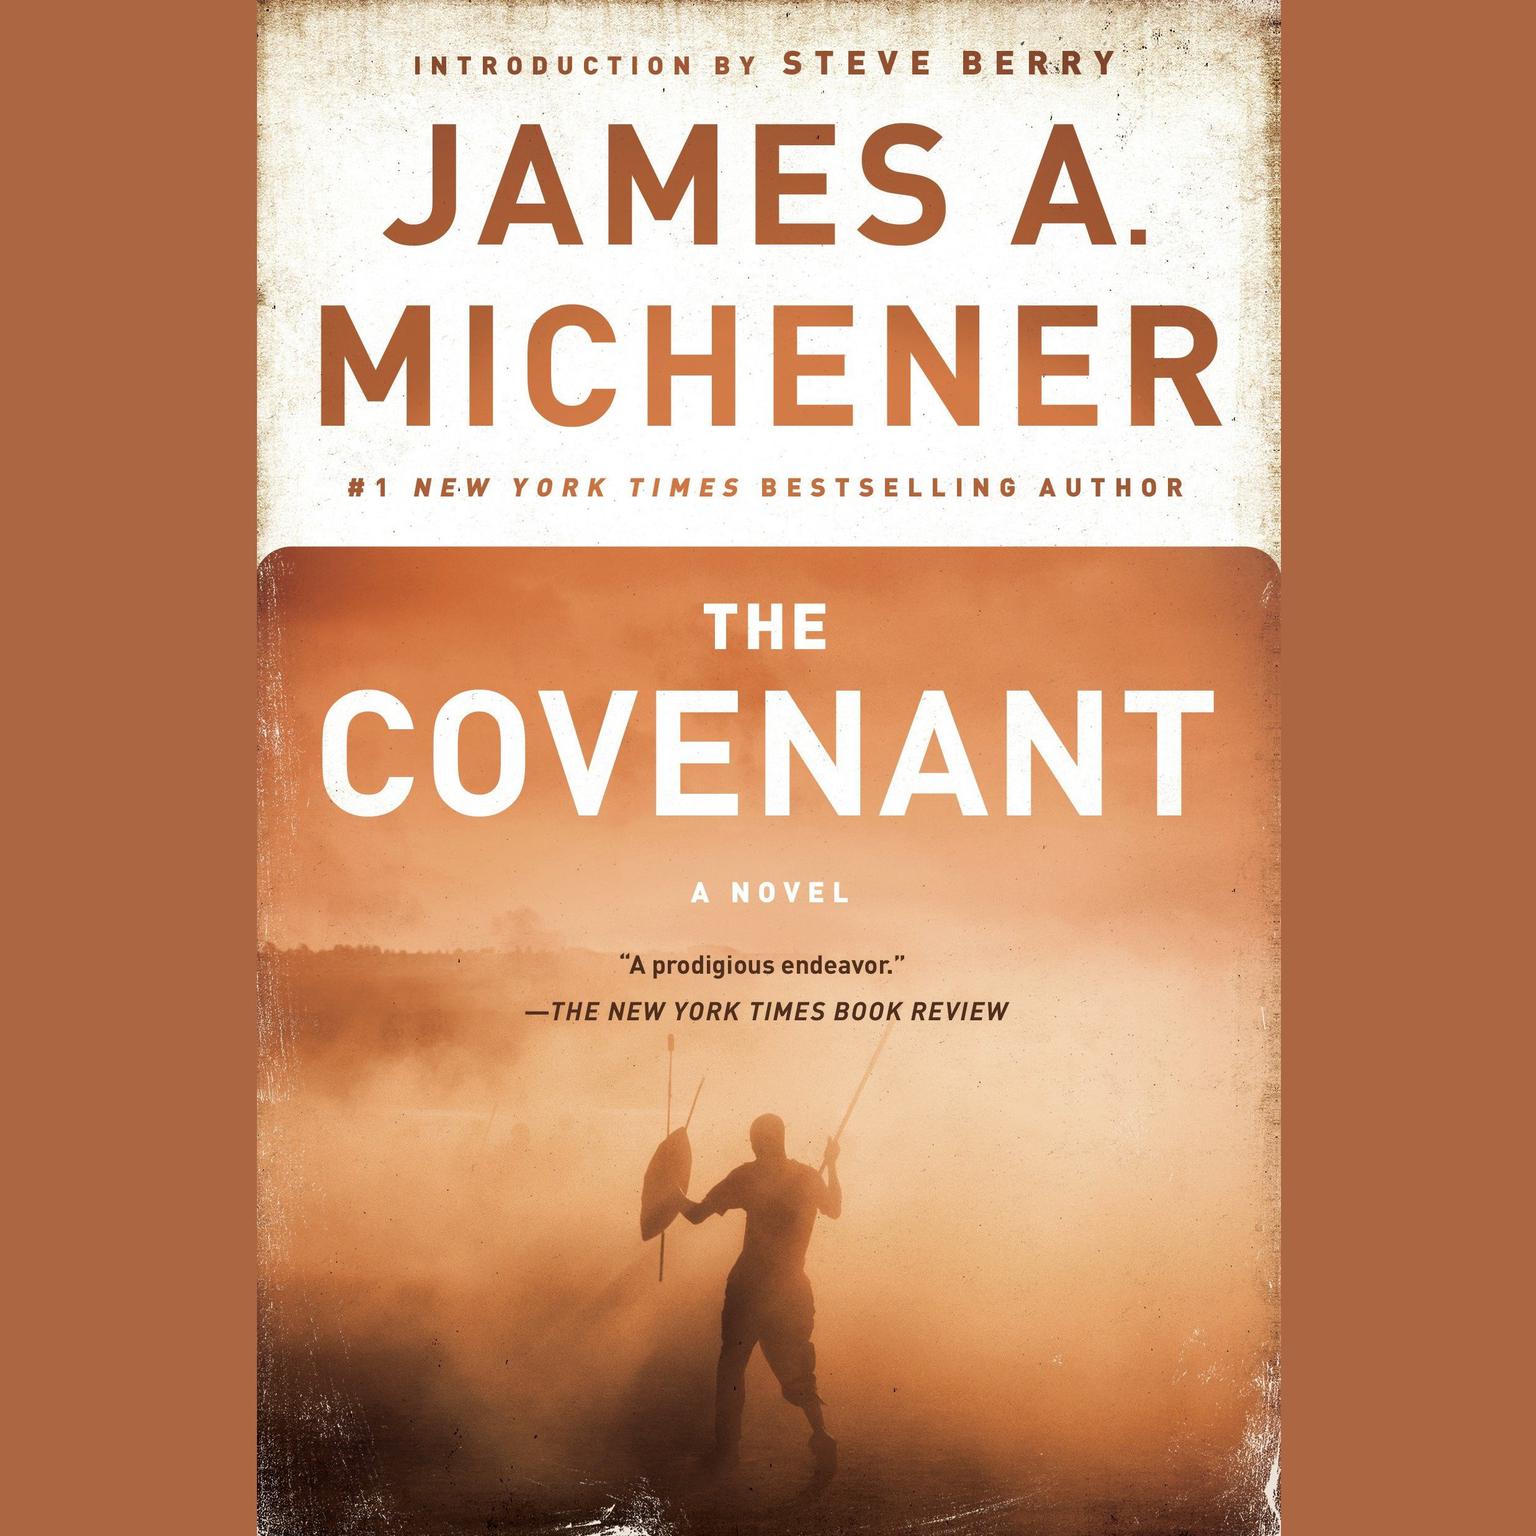 The Covenant: A Novel Audiobook, by James A. Michener